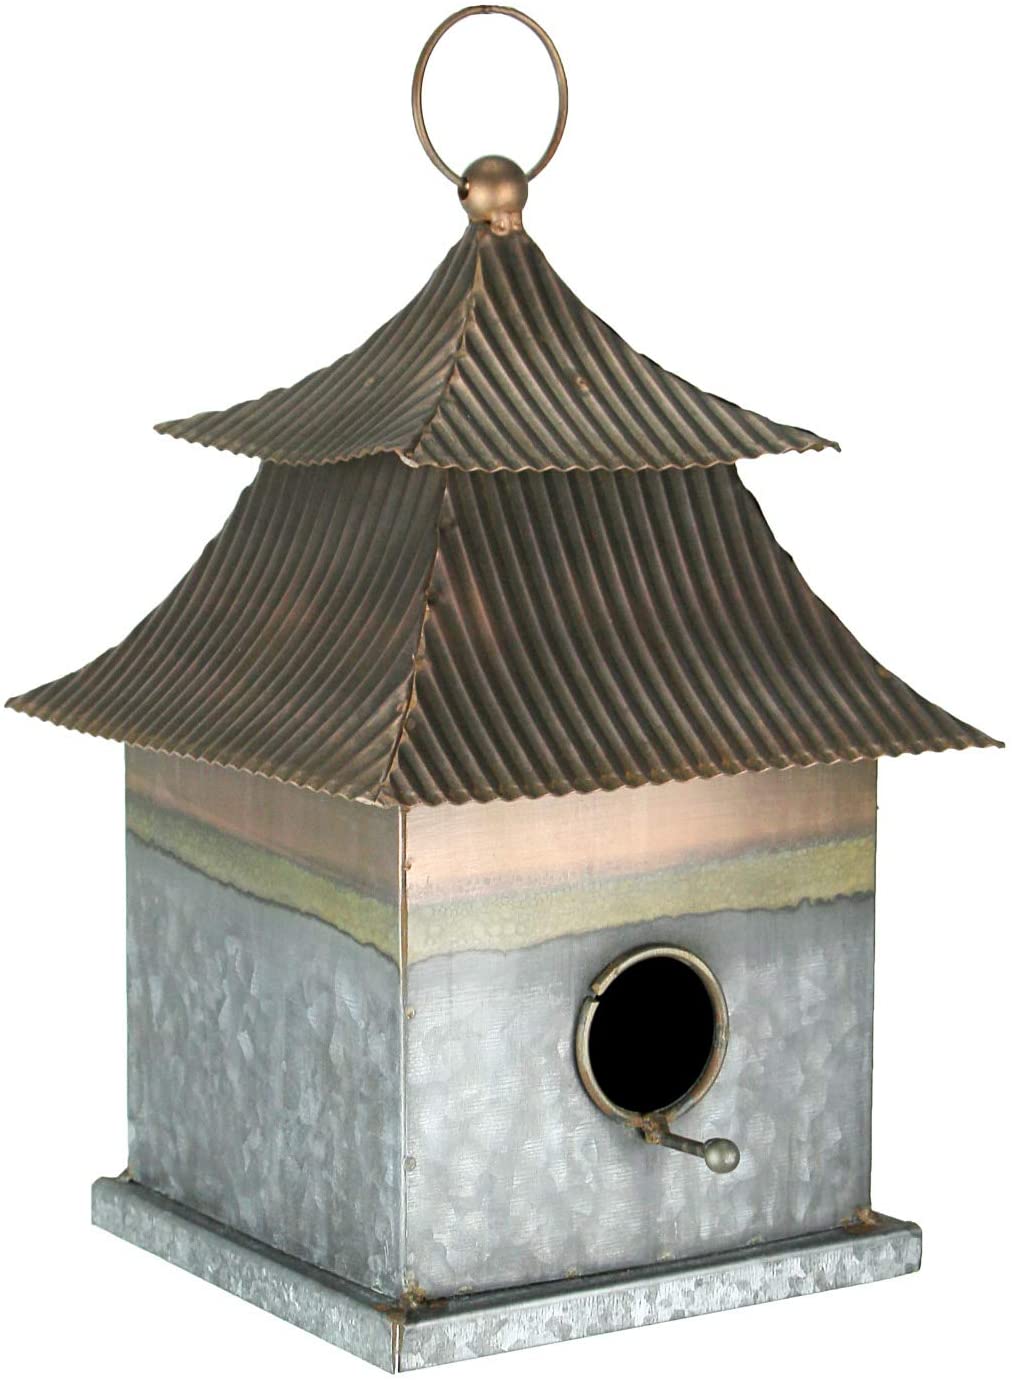 Add Asian elegance to your landscape with this nature inspired Japanese pagoda style bird house.  Made from metal, this pagoda shaped house has a galvanized zinc finish on the walls, and has a copper finished roof.